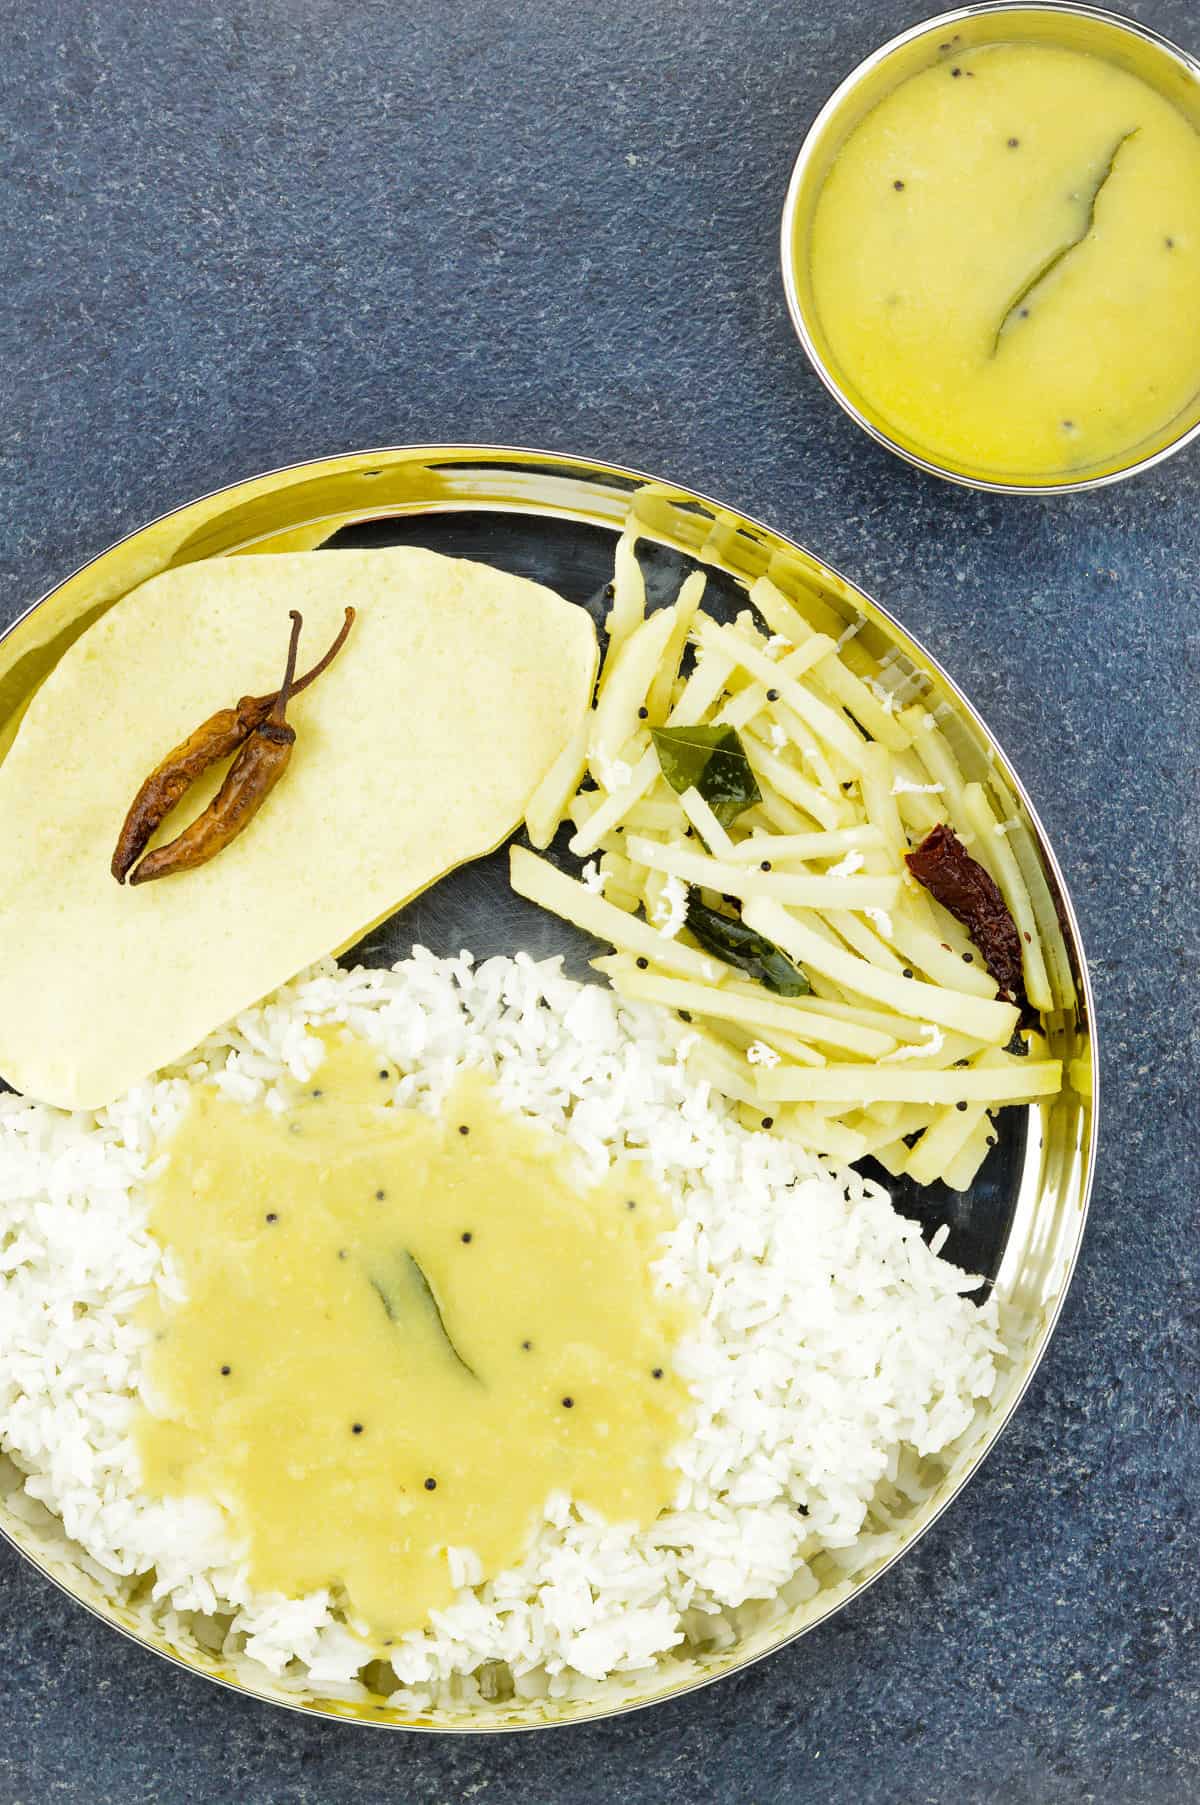 top shot of a konkani thali with dalitoy, rice, batate upkari, and papad, with a small bowl of additional dalitoy on the side